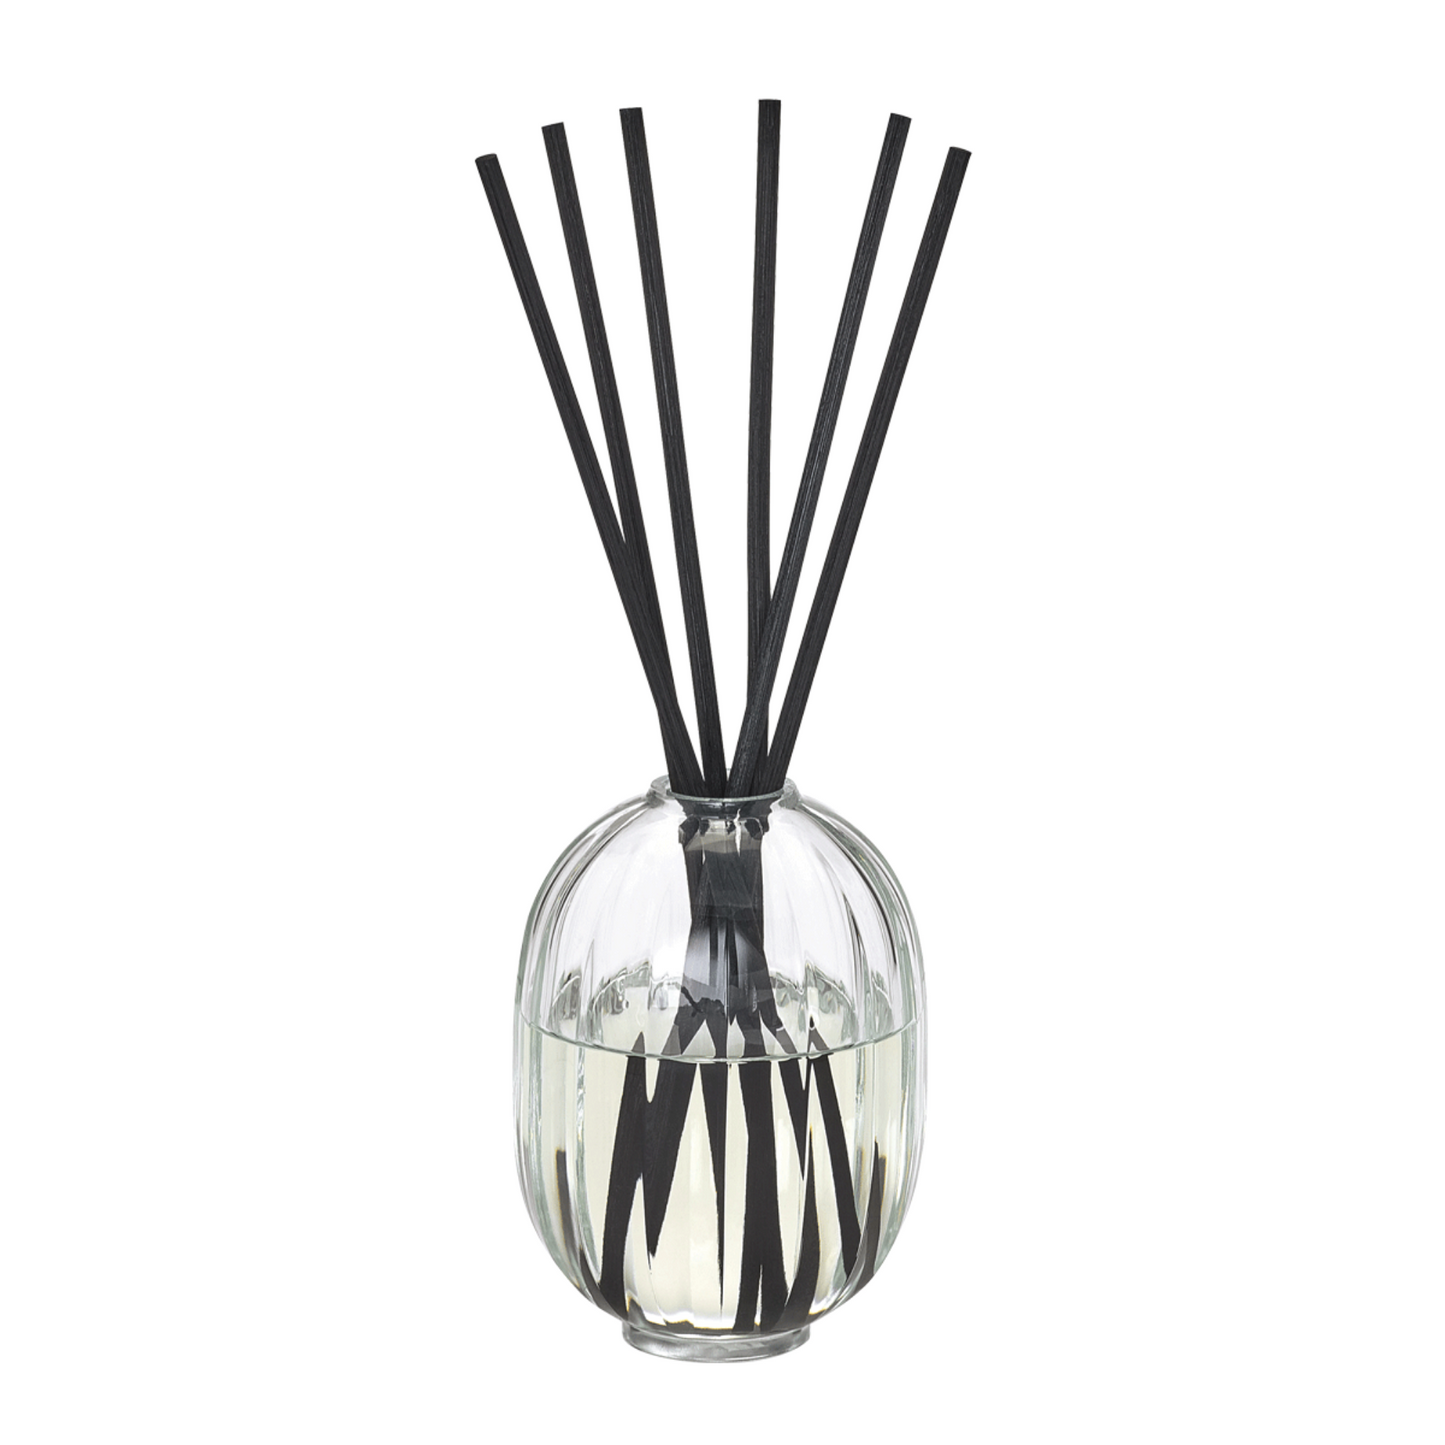 Primary Image of Paris Baies Home Reed Diffuser